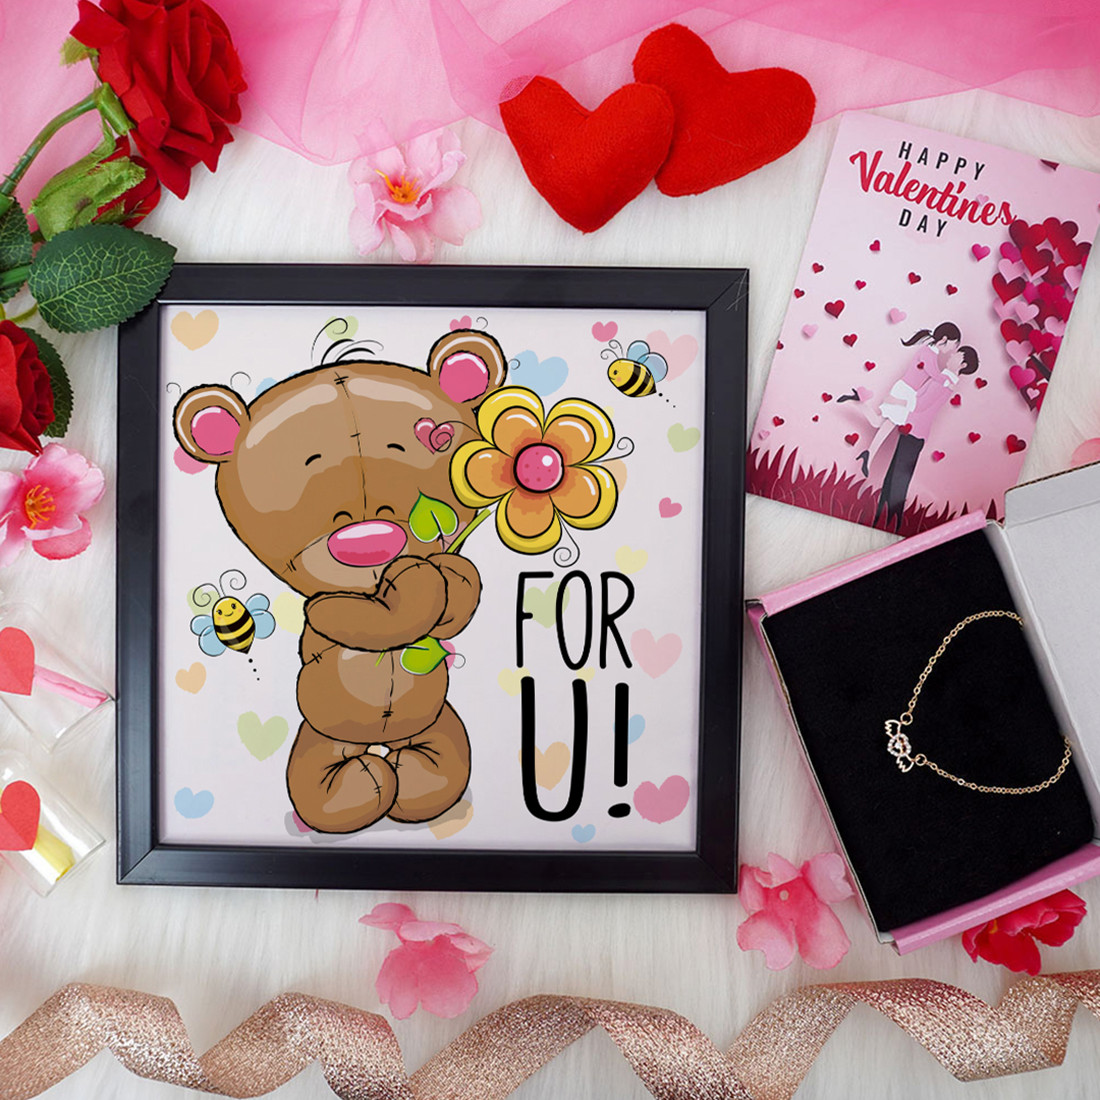 For U! Valentine Gift Set | Valentine's Day Gifts for Girlfriend | Valentine Gift for Wife | Women's Pendant/Pendant for Girl/Greeting Card | Photo Frame (8x8 Inches)